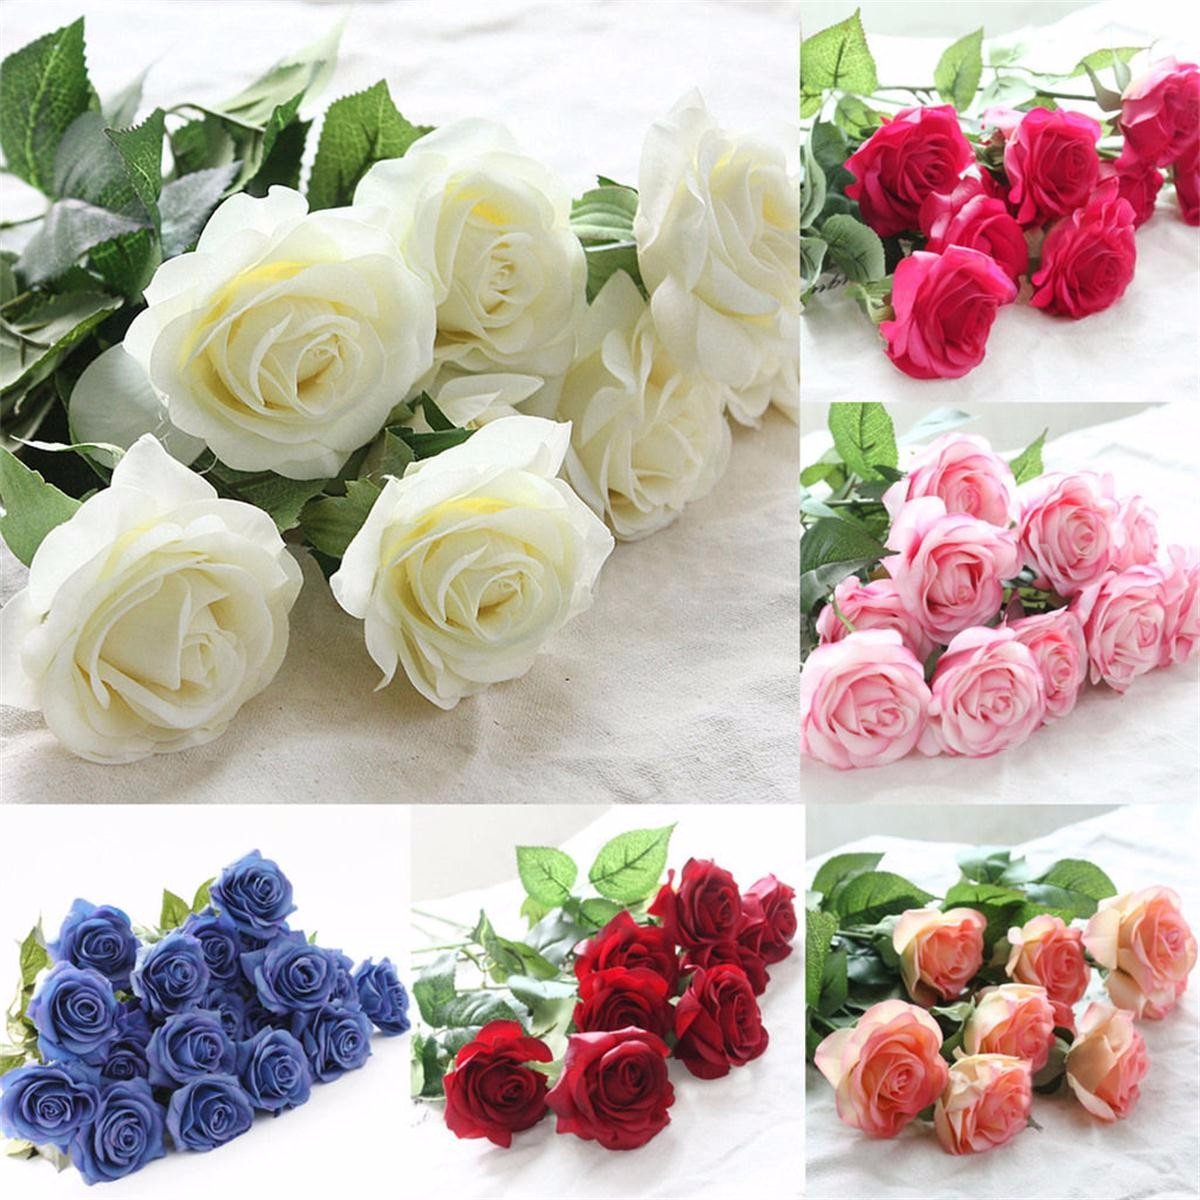 

Artificial Real Latex Touch Rose Flowers, Yellow royal blue lemon yellow red colorful pink champagne white